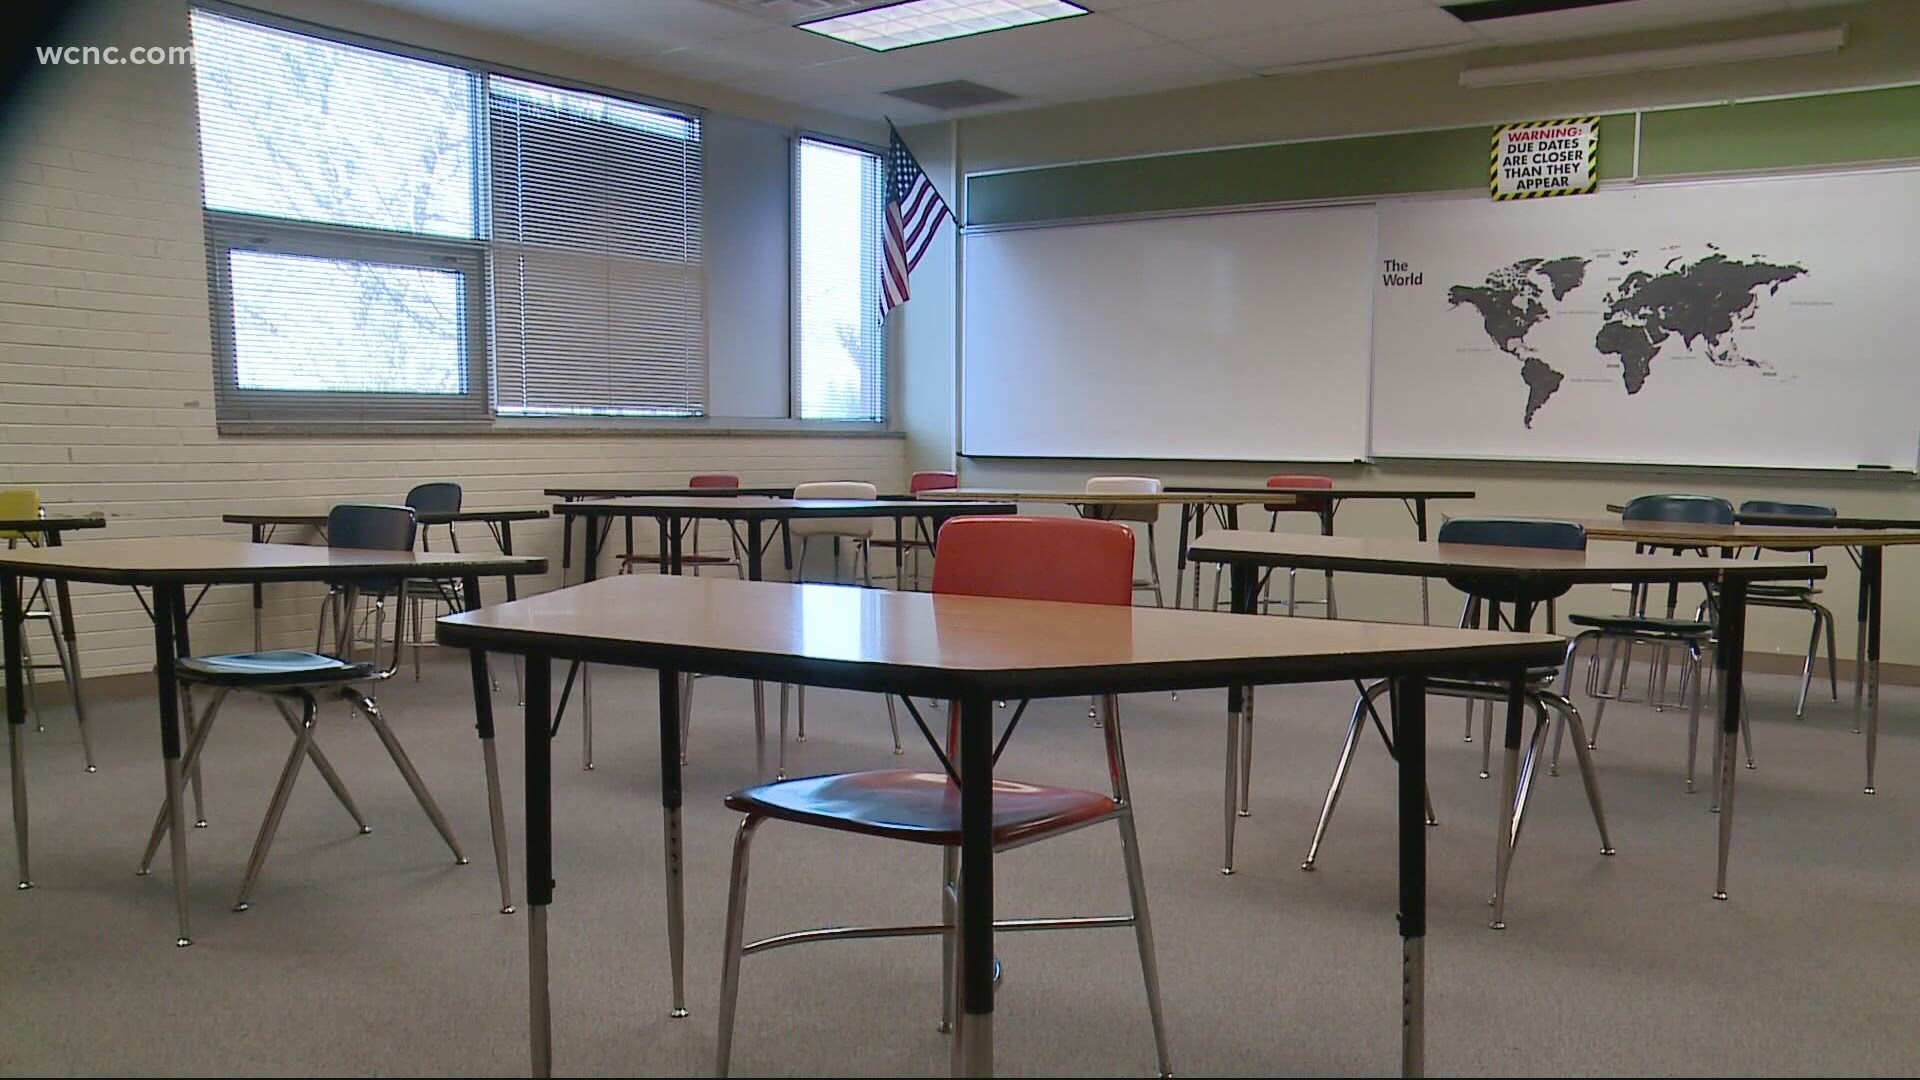 Elementary schools will return to four days a week of in-person learning in March.